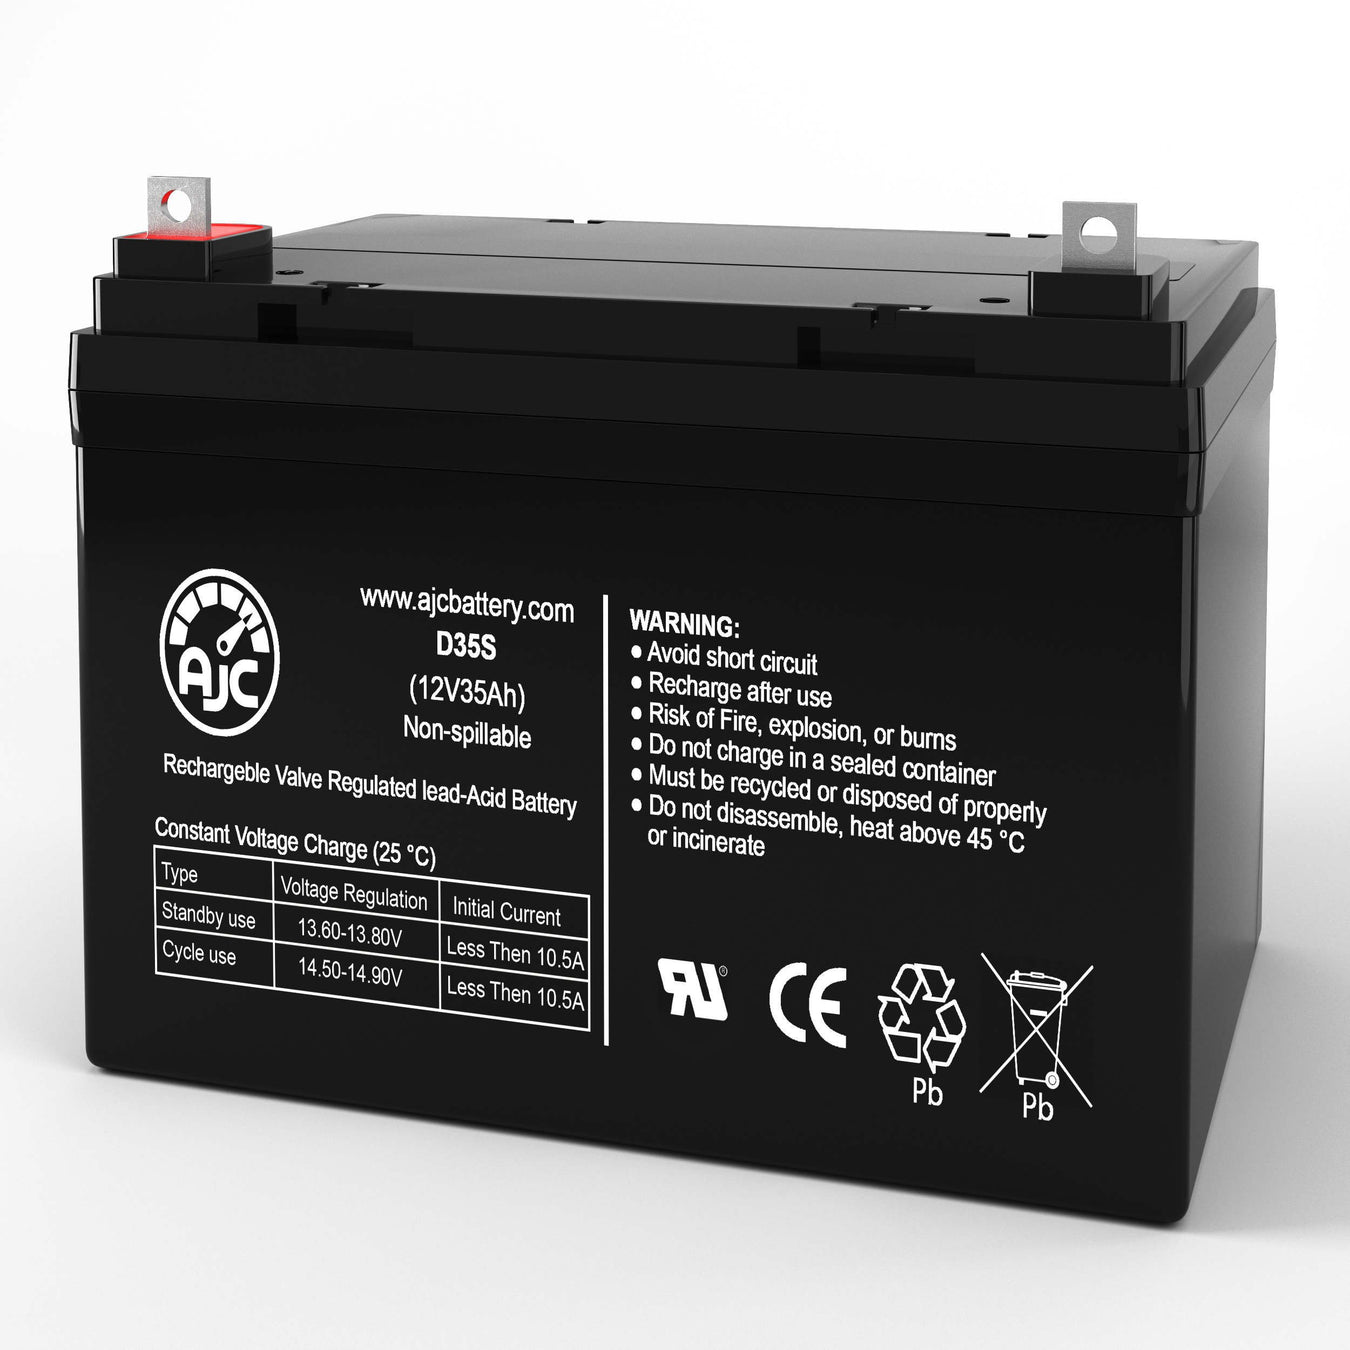 Motorcaddy and Golf Caddy Batteries